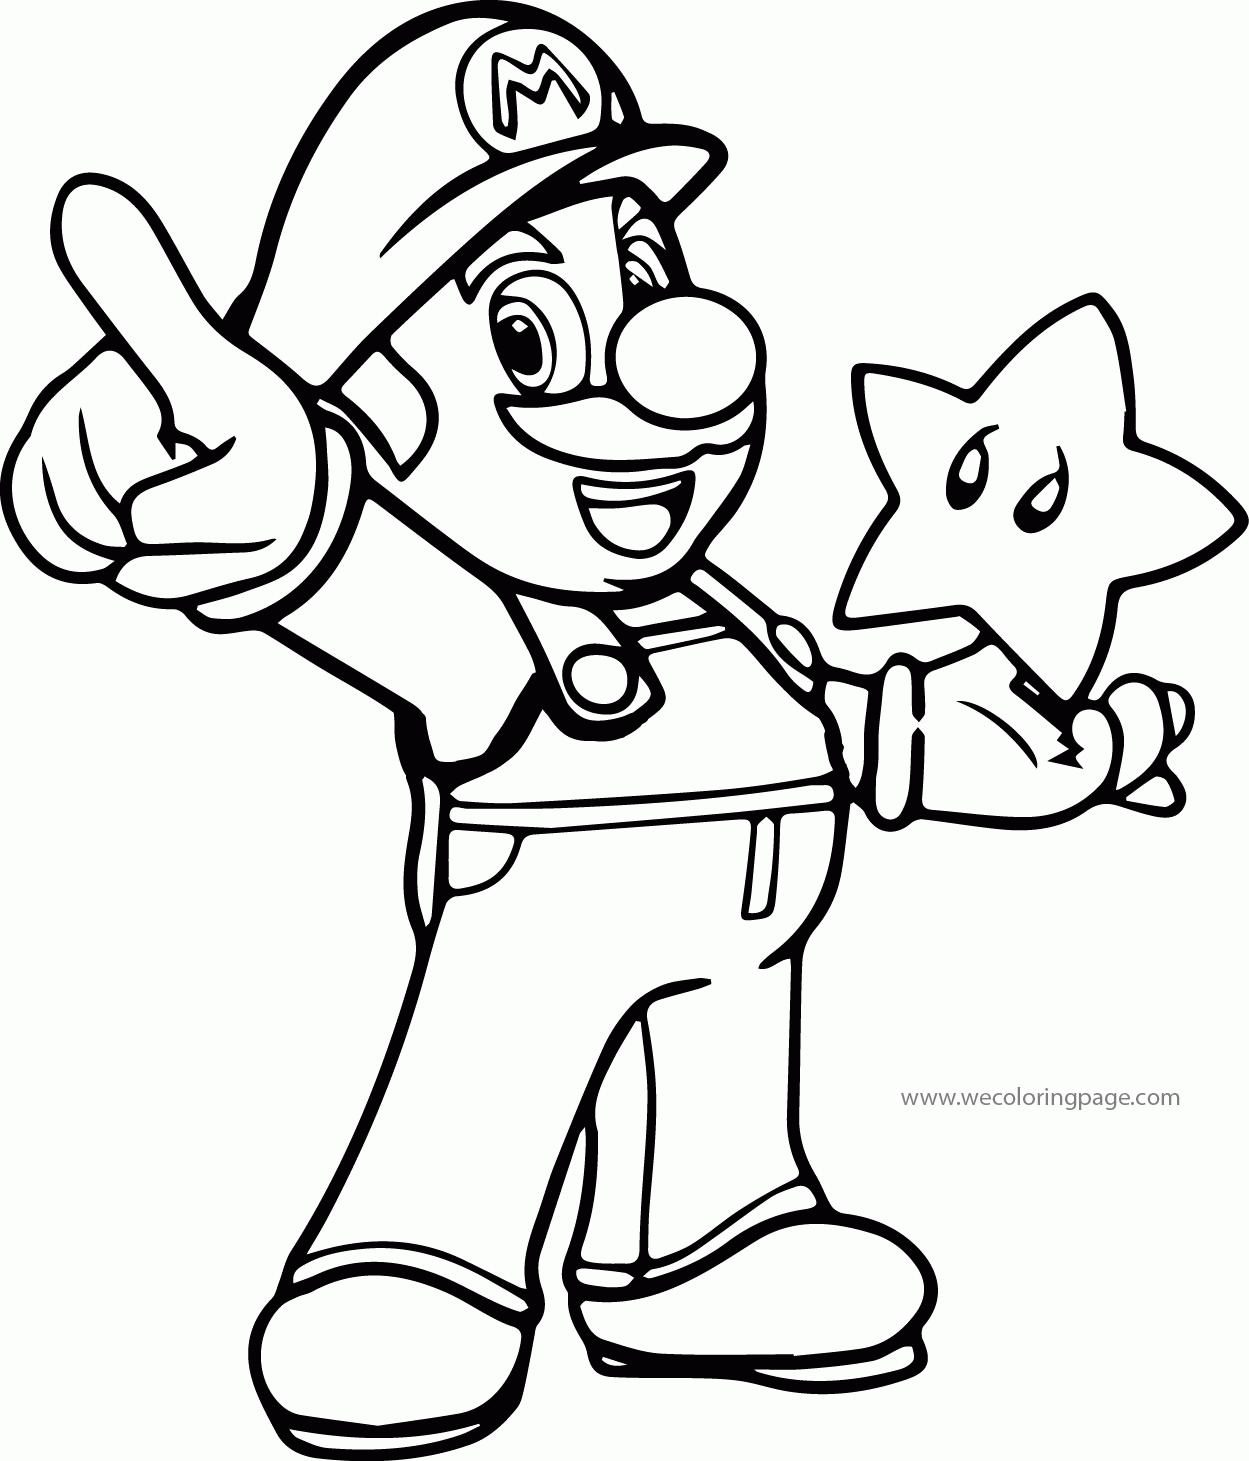 Mario Fighting Bowser Coloring Pages Mario Coloring Pages Free